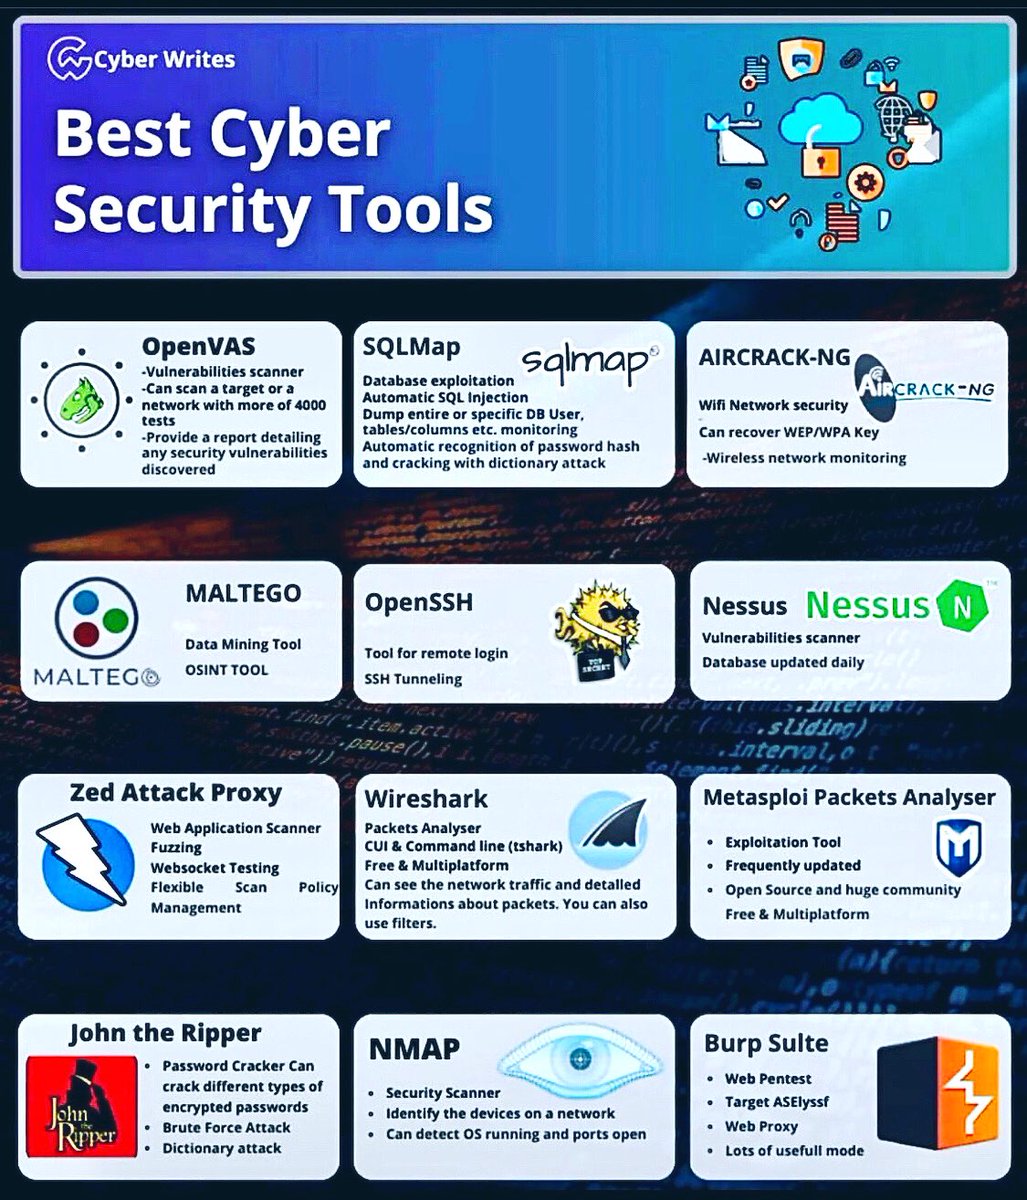 Best Cybersecurity Tools

#cybersecurity #pentesting #informationsecurity #hacking #DataSecurity #CyberSec #bugbountytips #Linux #websecurity #Network #NetworkSecurity #cybersecurityawareness